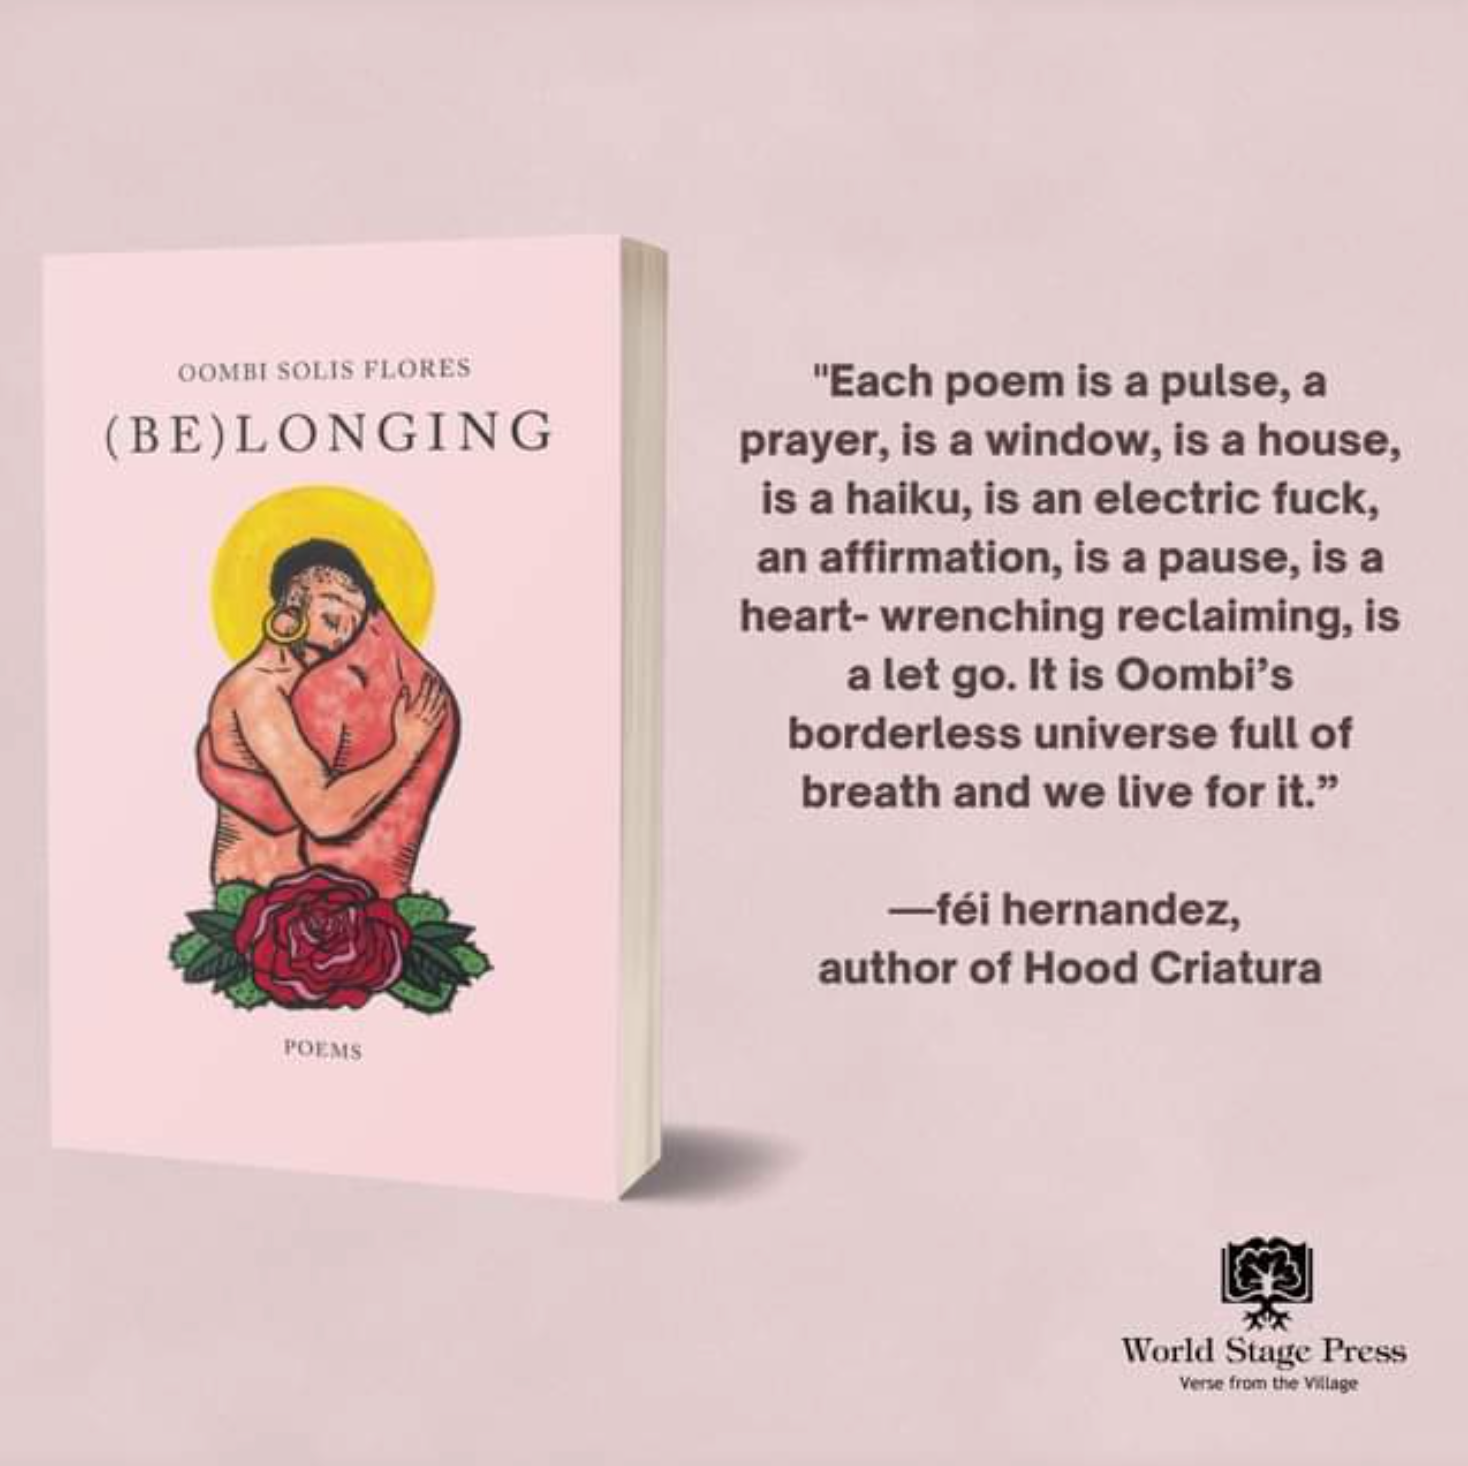 (BE)LONGING: A Collection of Poetry by Oombi Solis Flores